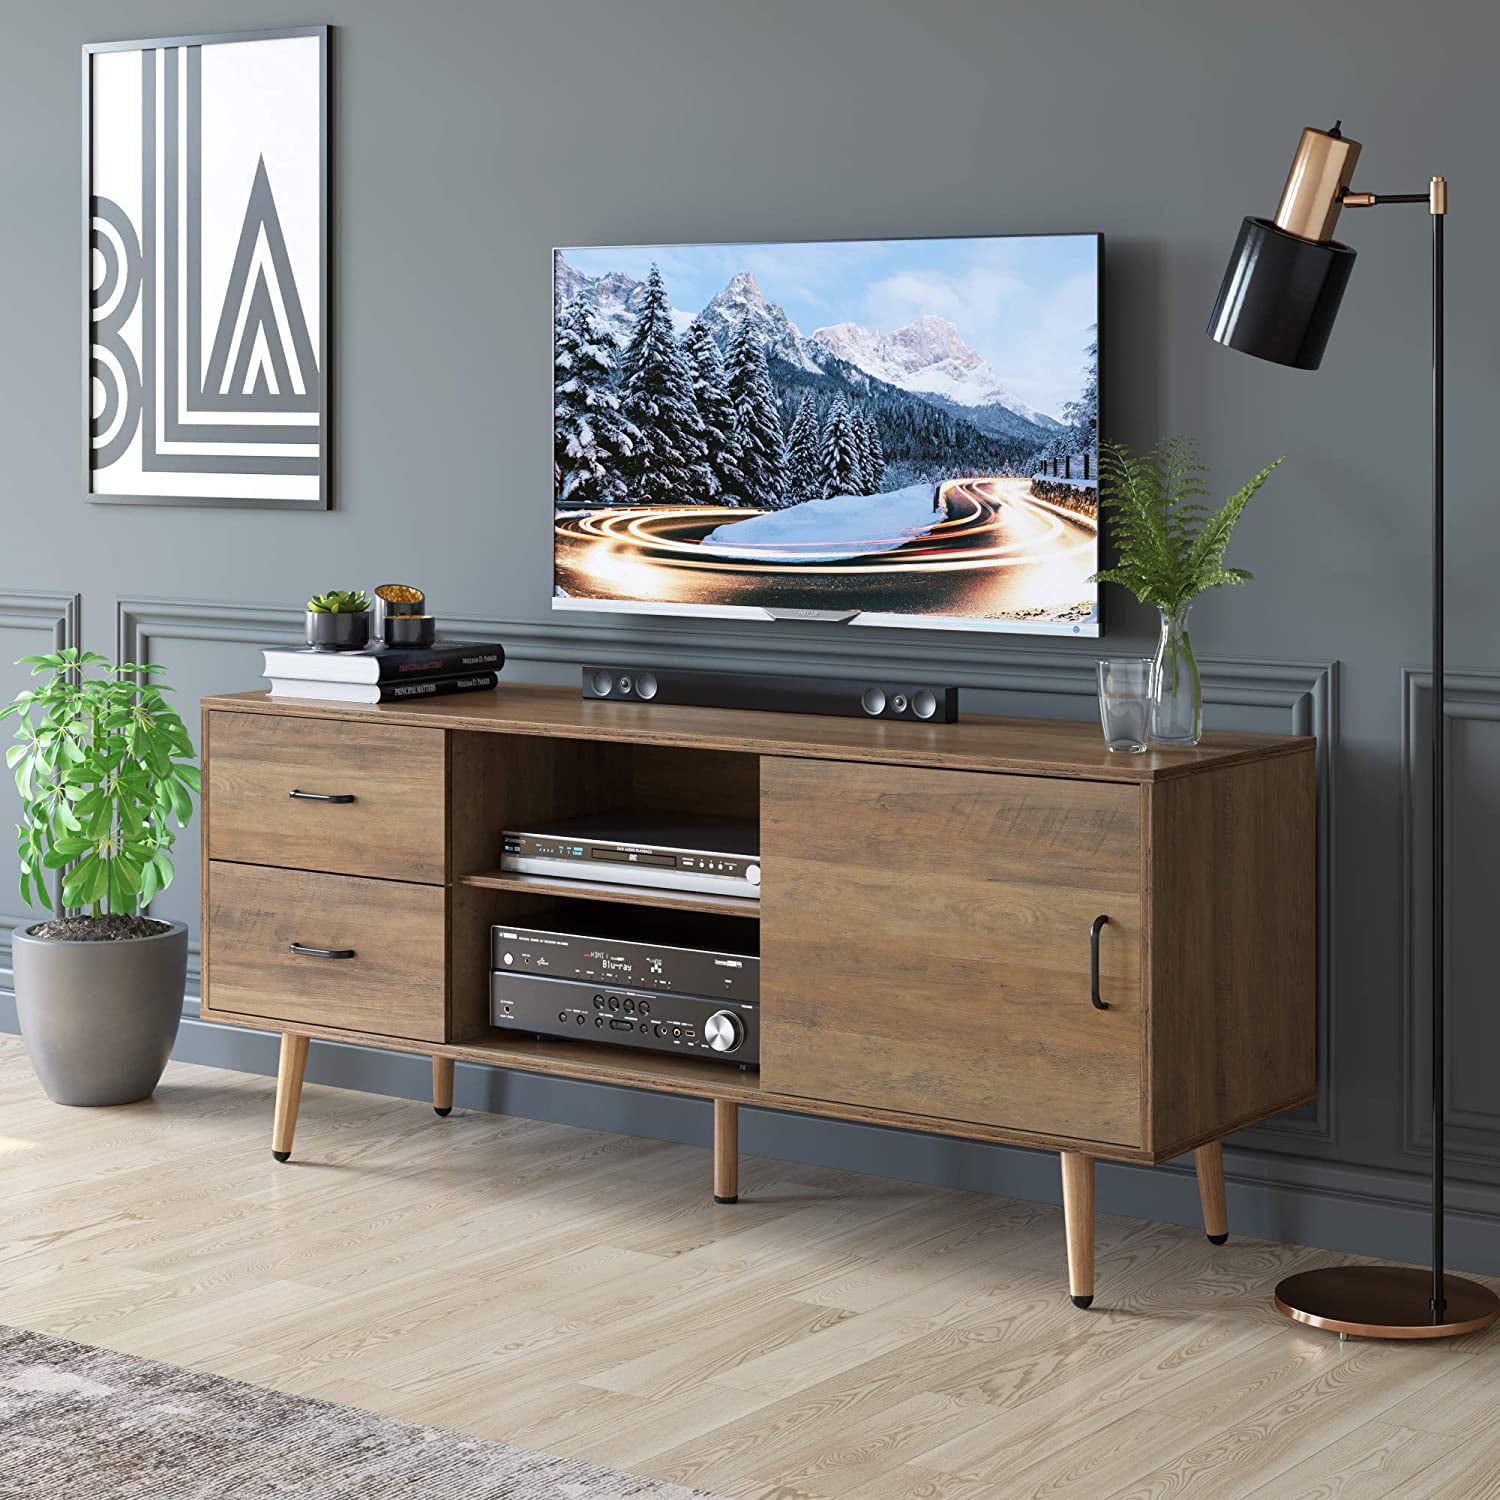 Homfa Tv Cabinet Media Console Table, Wood Tv Stand For Tvs Up To 60 For Media Entertainment Center Tv Stands (Gallery 8 of 20)